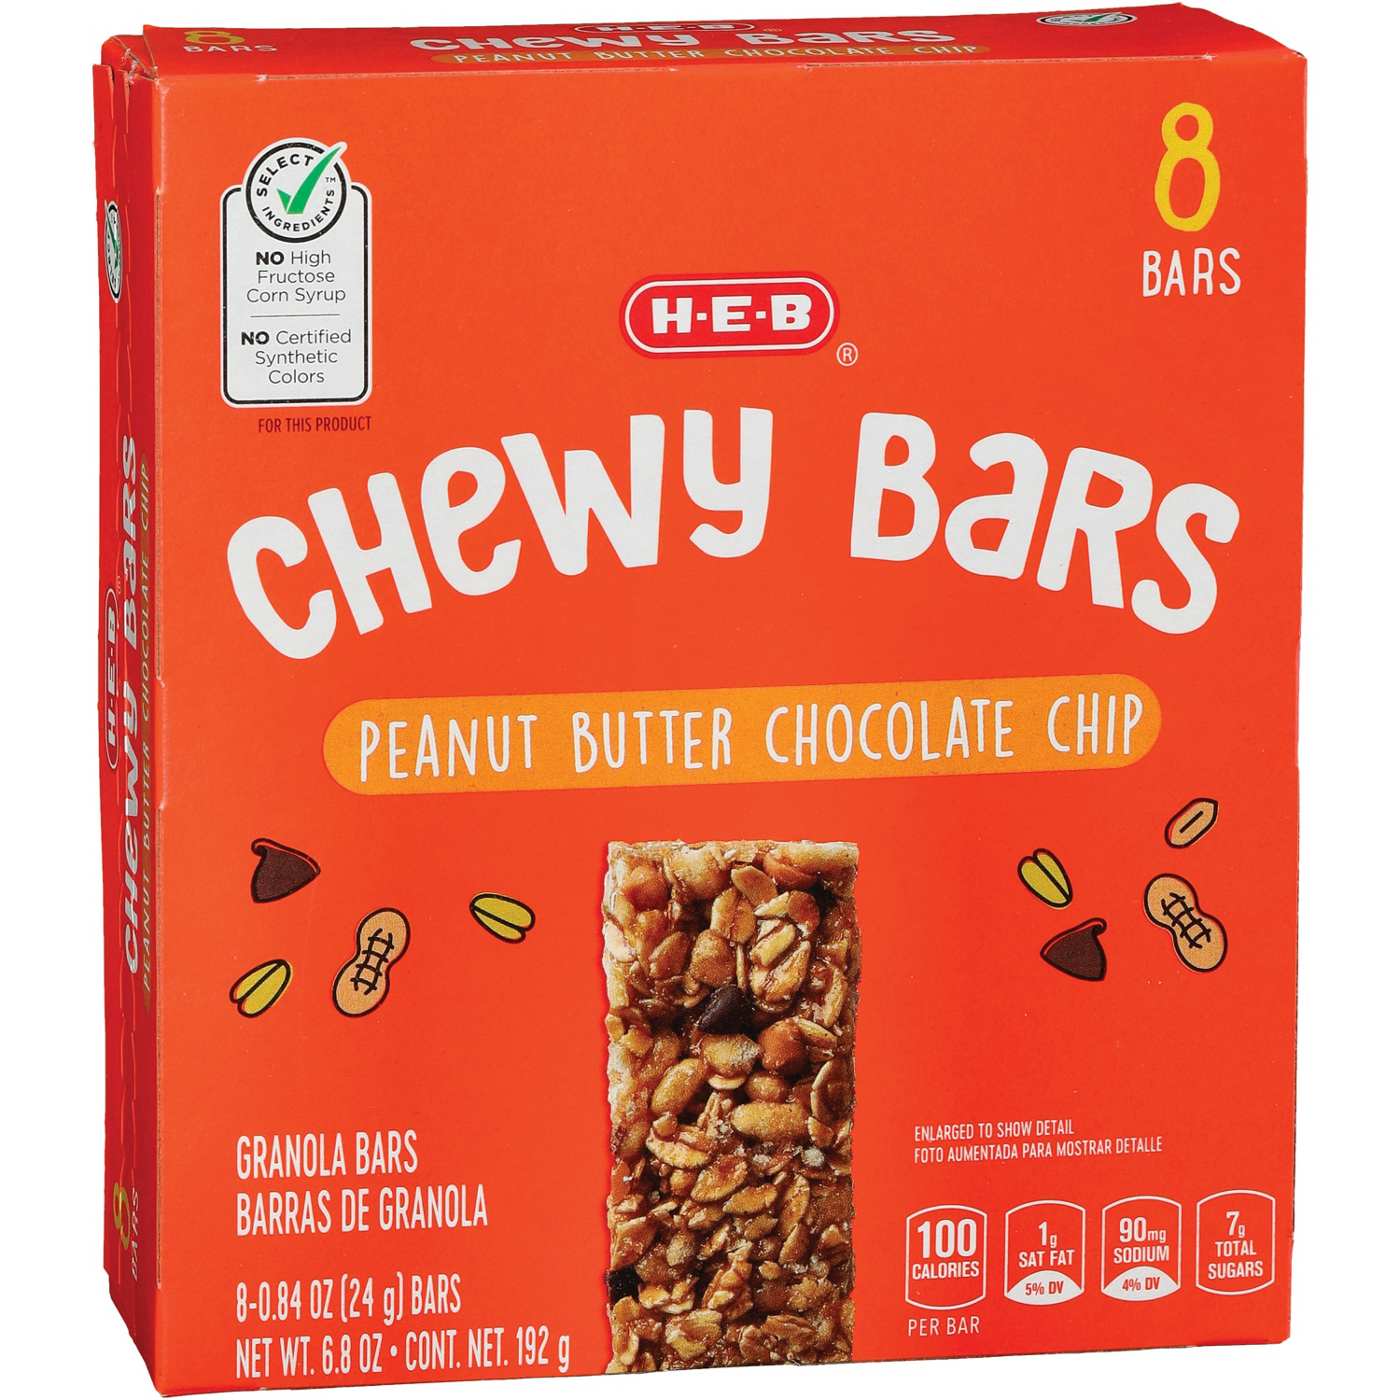 H-E-B Peanut Butter Chocolate Chip Chewy Bars; image 2 of 2